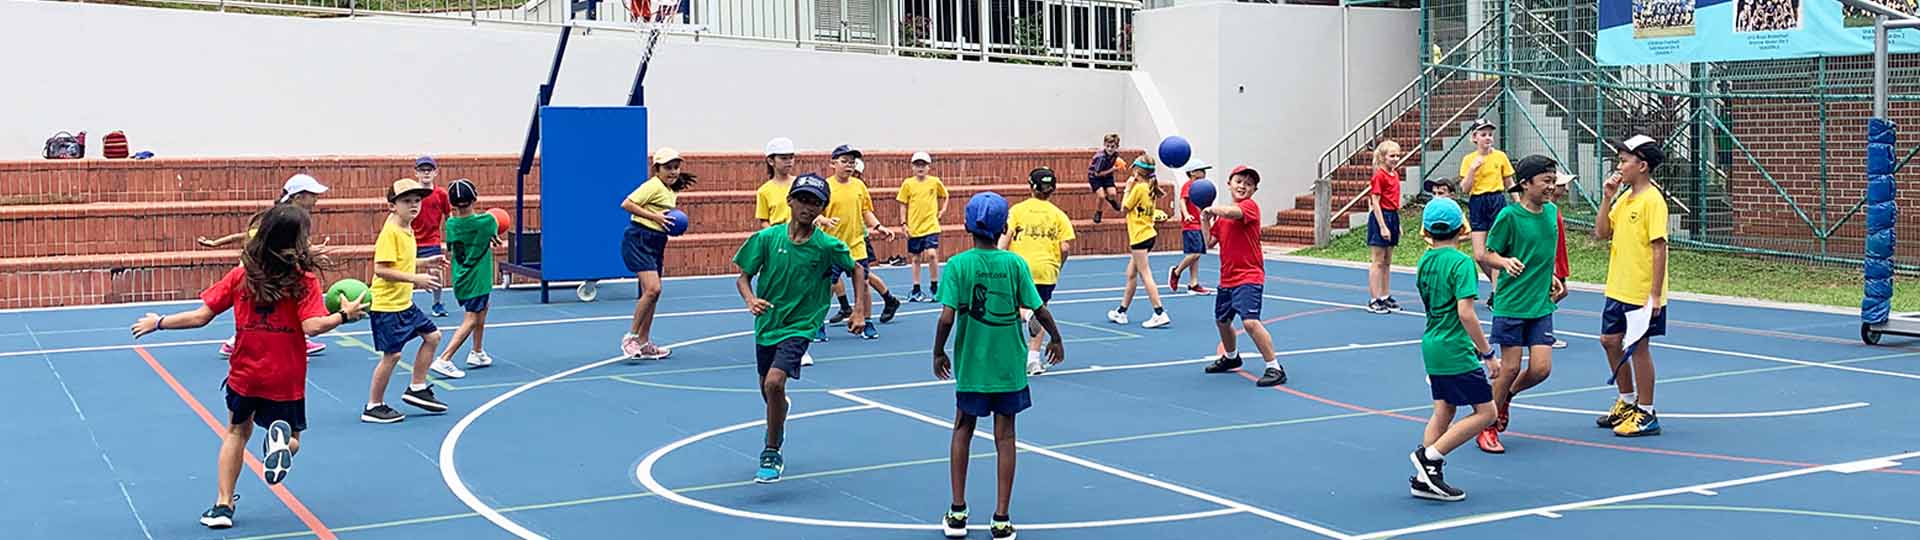 Sports is an integral part of our holistic education here at Chatsworth International School